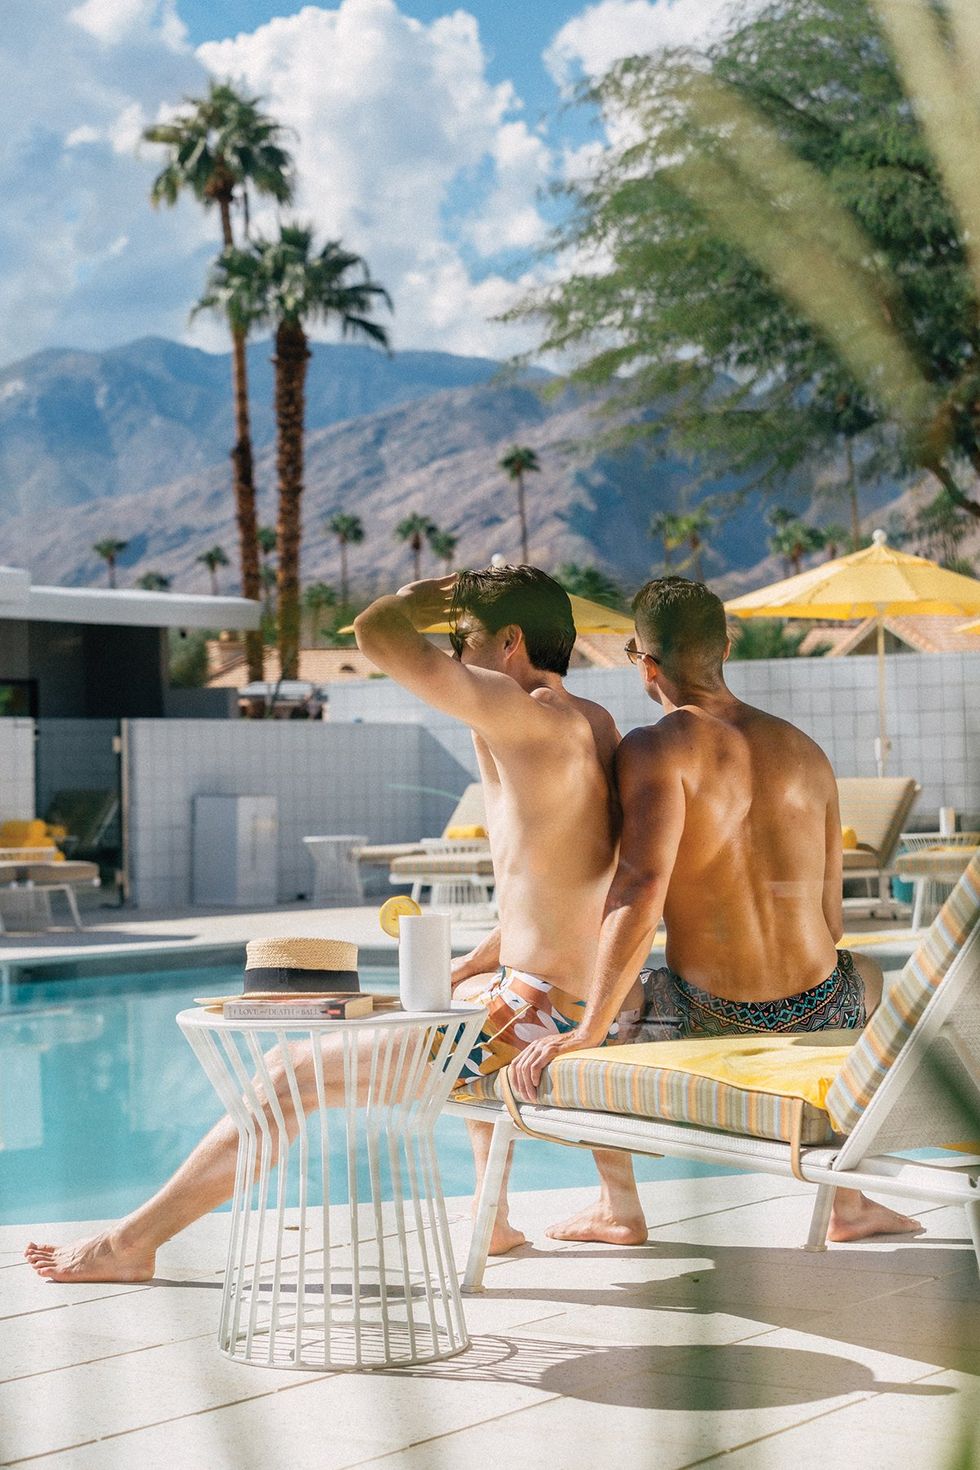 A gay couple lounge poolside at the Twin Palms Resort, a gay men's clothing optional resort in Palm Springs